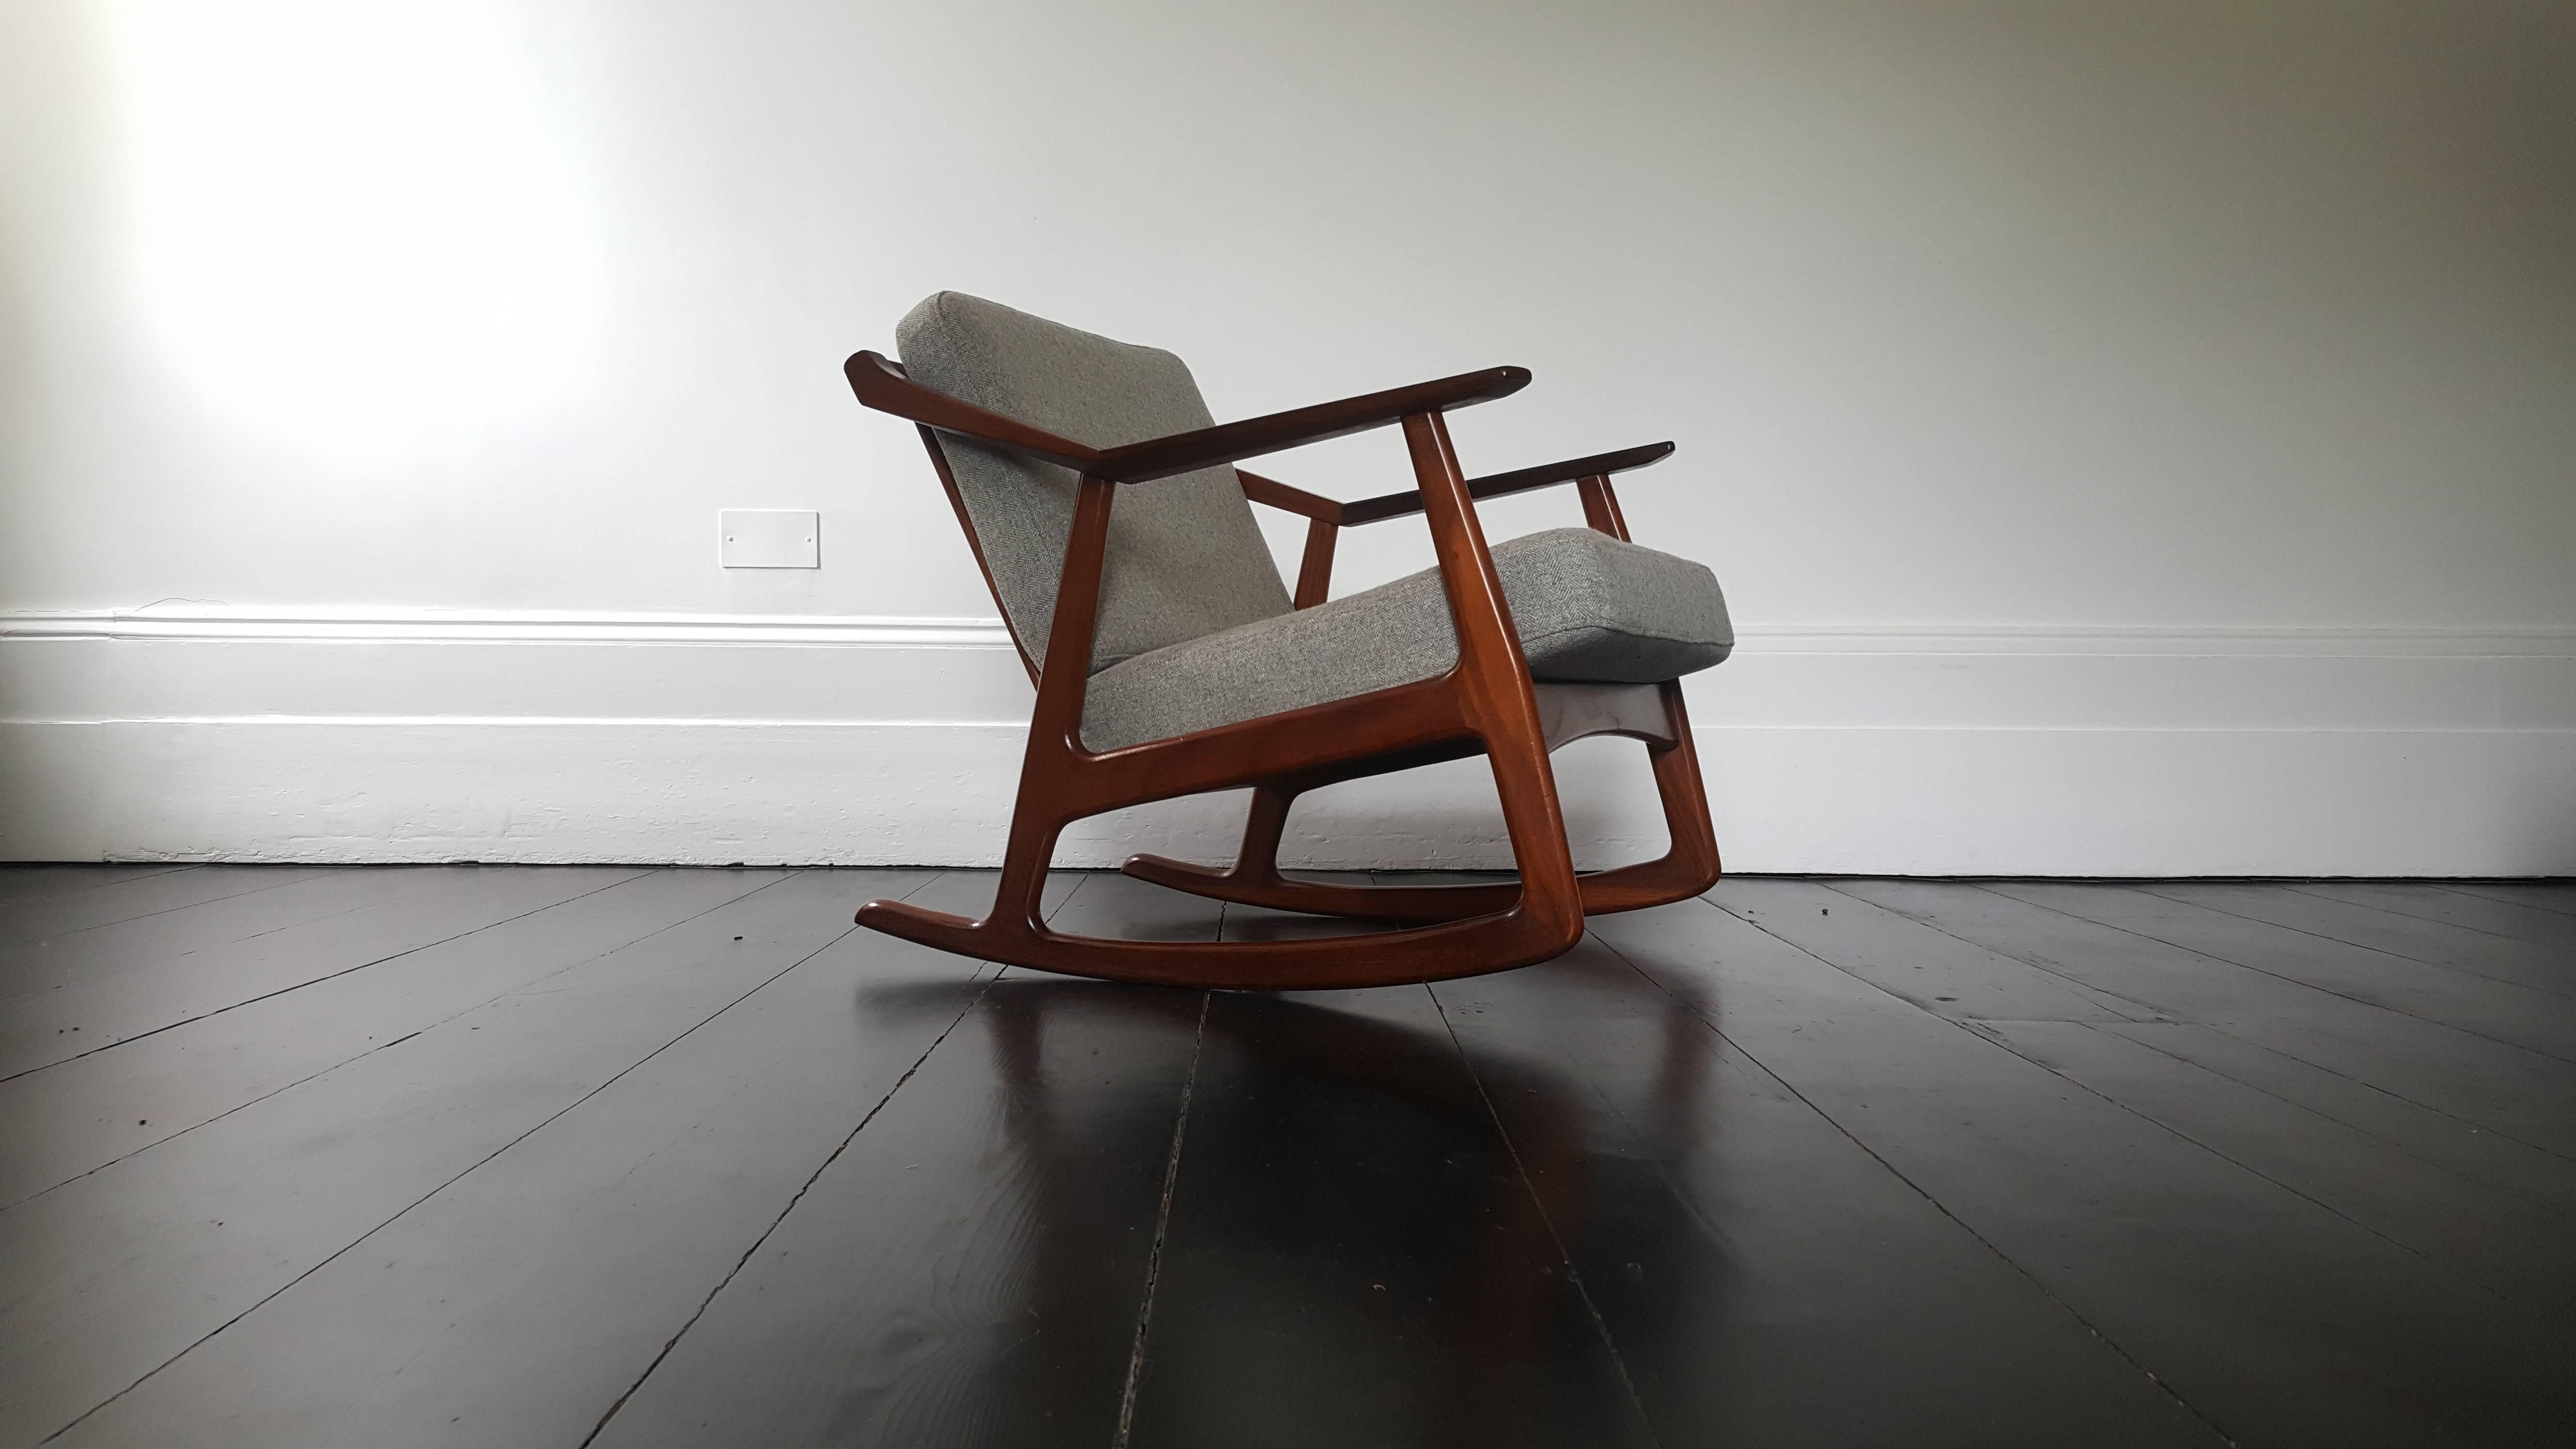 A rare Mid-century rocker designed by H. Brockmann-Petersen, with an angular refinished teak frame and new grey fabric with slight Herringbone detail the piece has a great look.

We provide very competitive global shipping rates per your